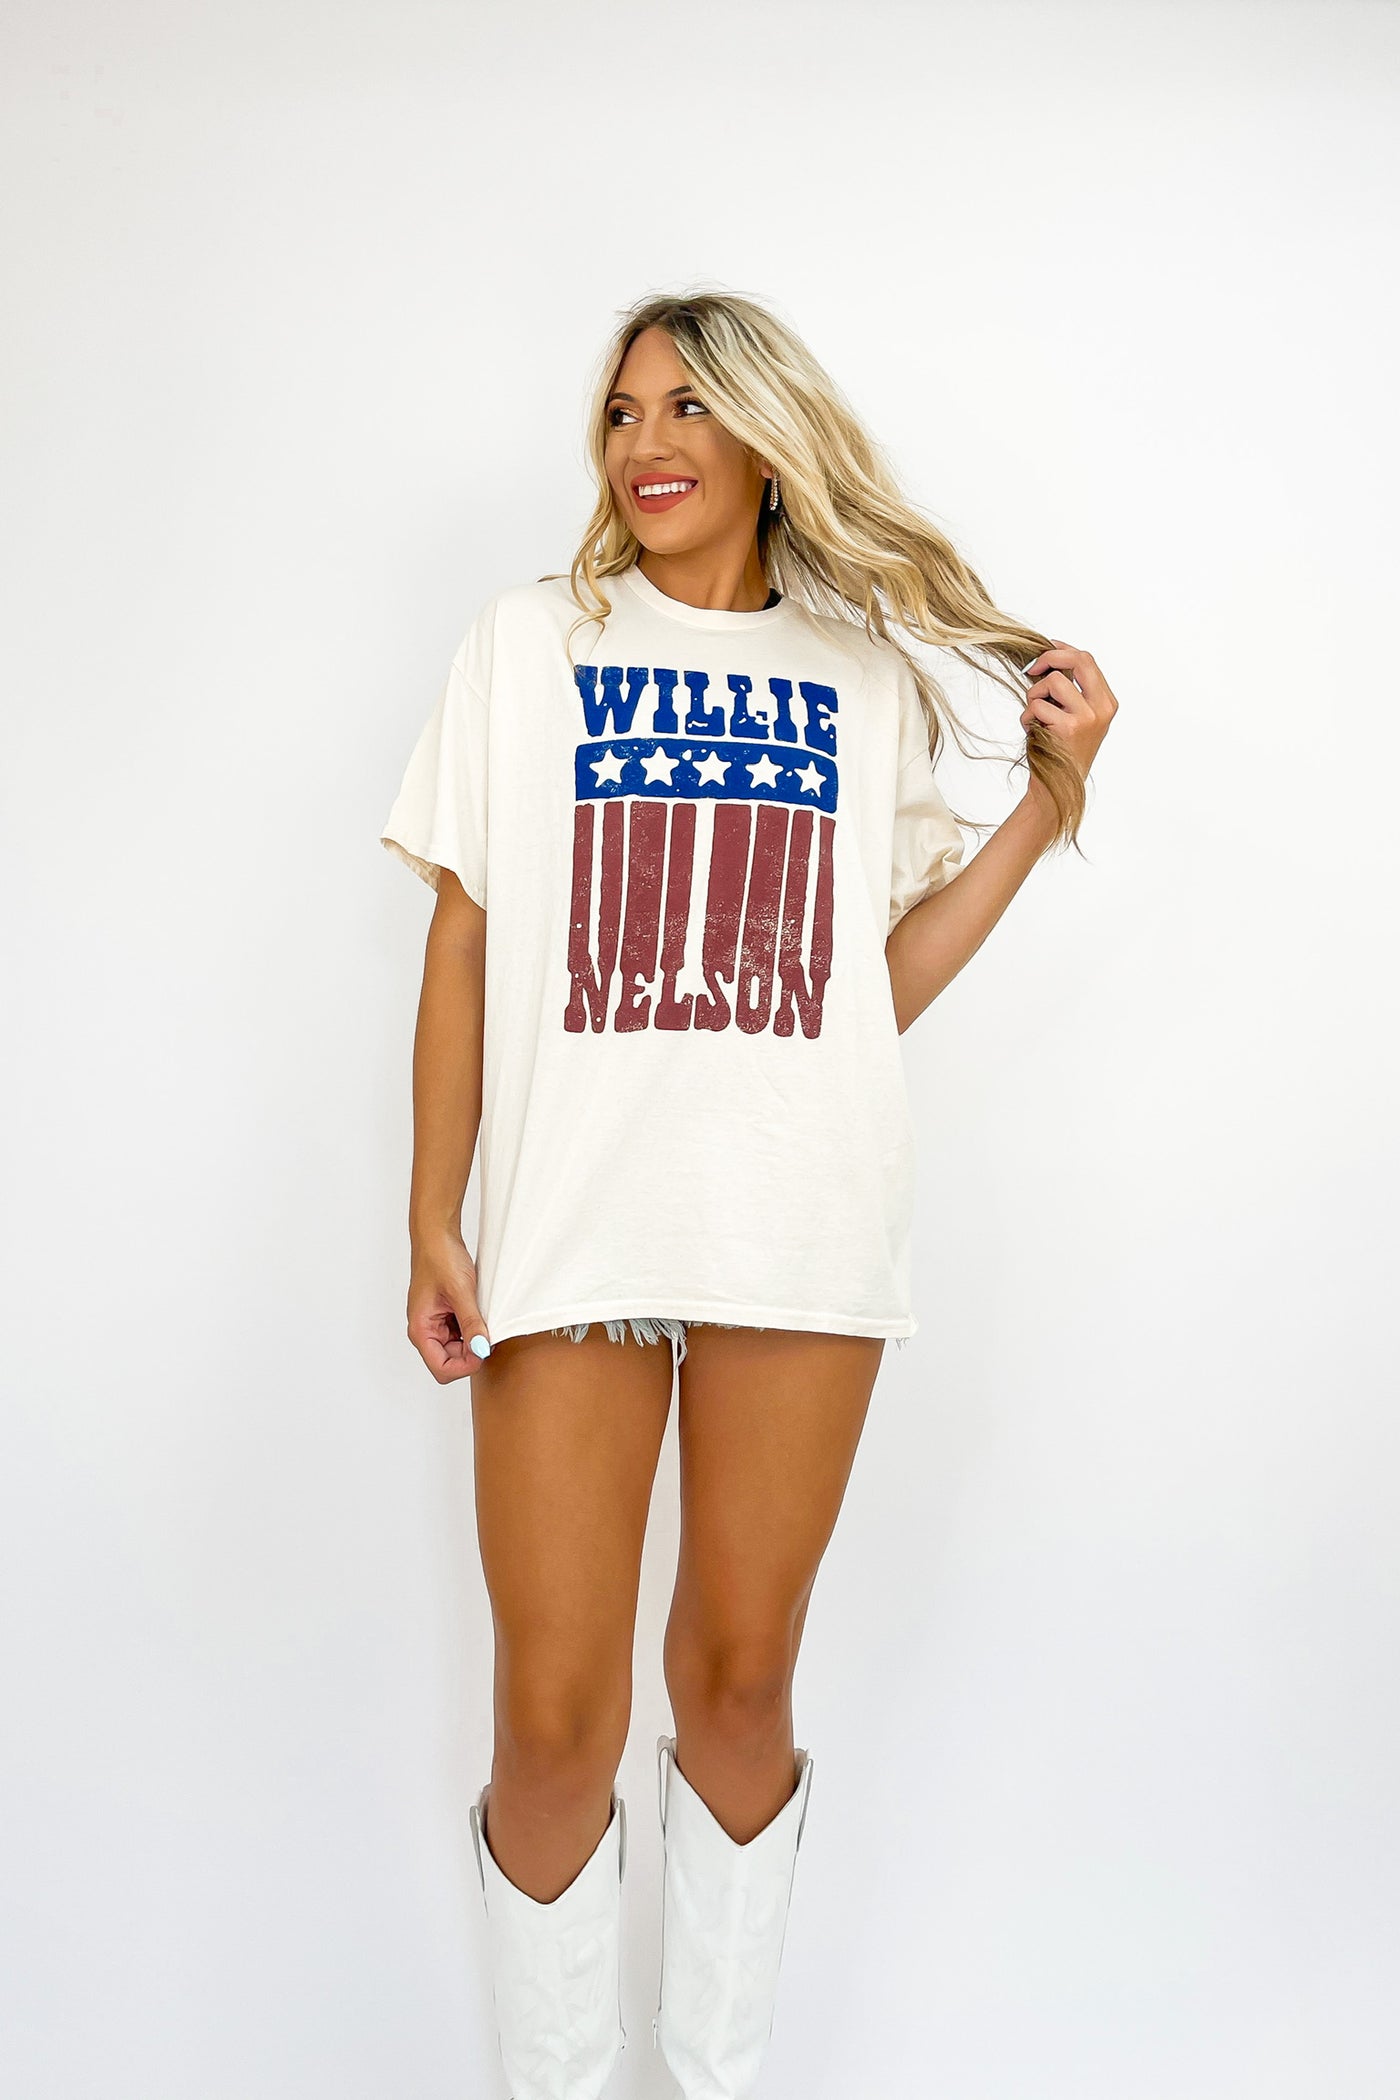 LivyLu Willie Nelson Stars and Stripes Distressed Tee